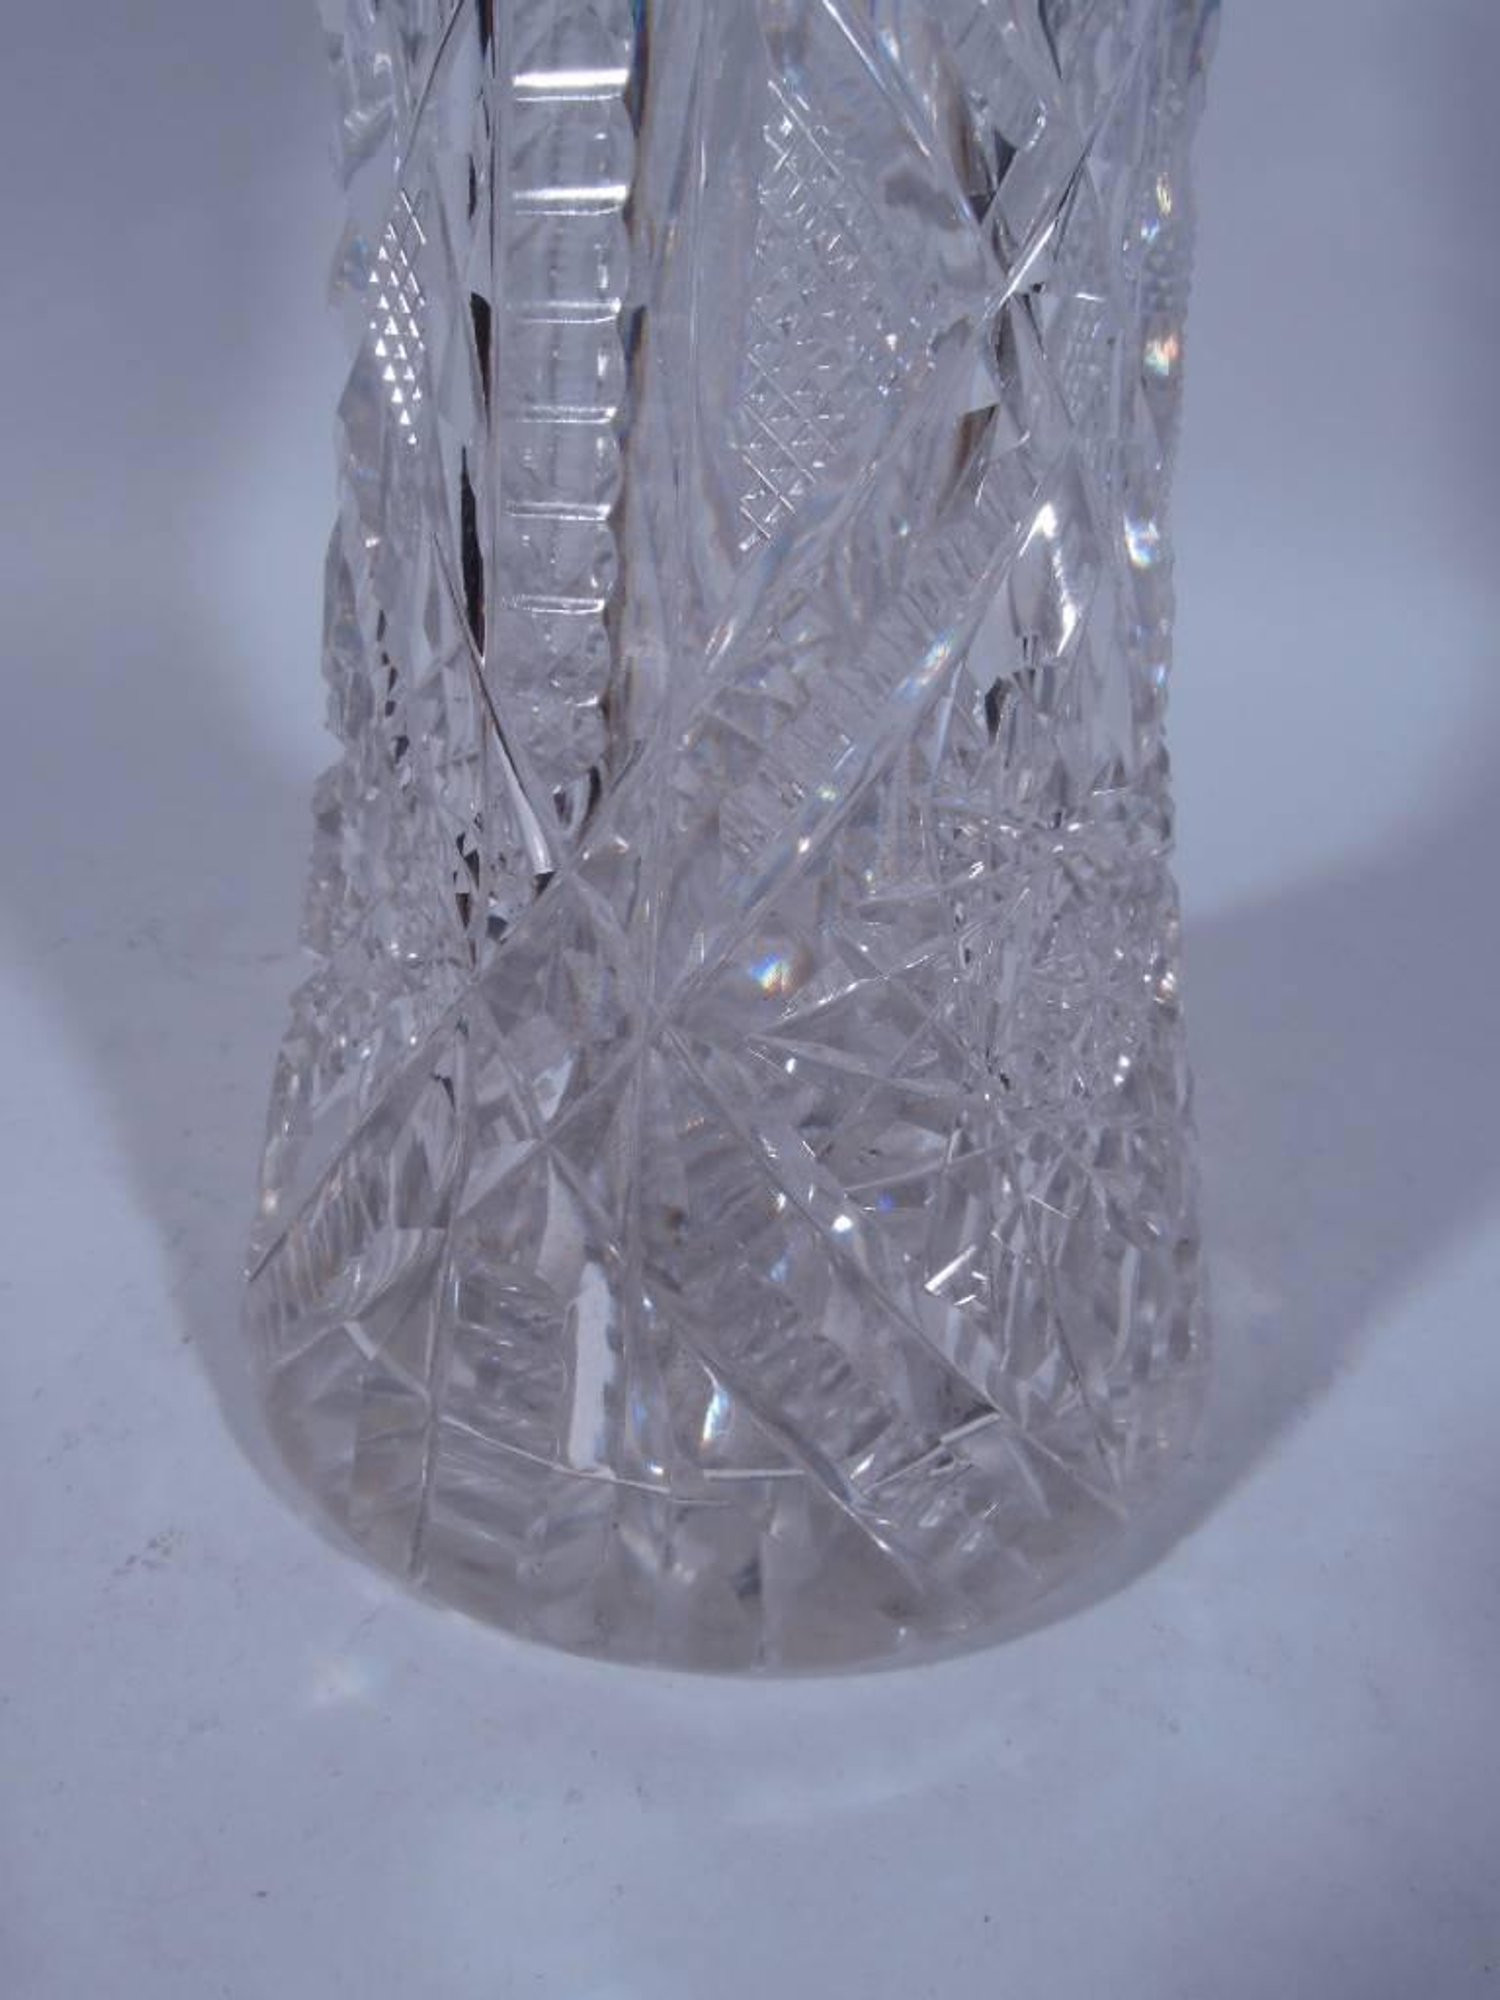 30 attractive Sterling Silver Vase Engraved 2024 free download sterling silver vase engraved of antique brilliant cut glass and sterling silver vase by redlich for inside antique brilliant cut glass and sterling silver vase by redlich for sale at 1stdib